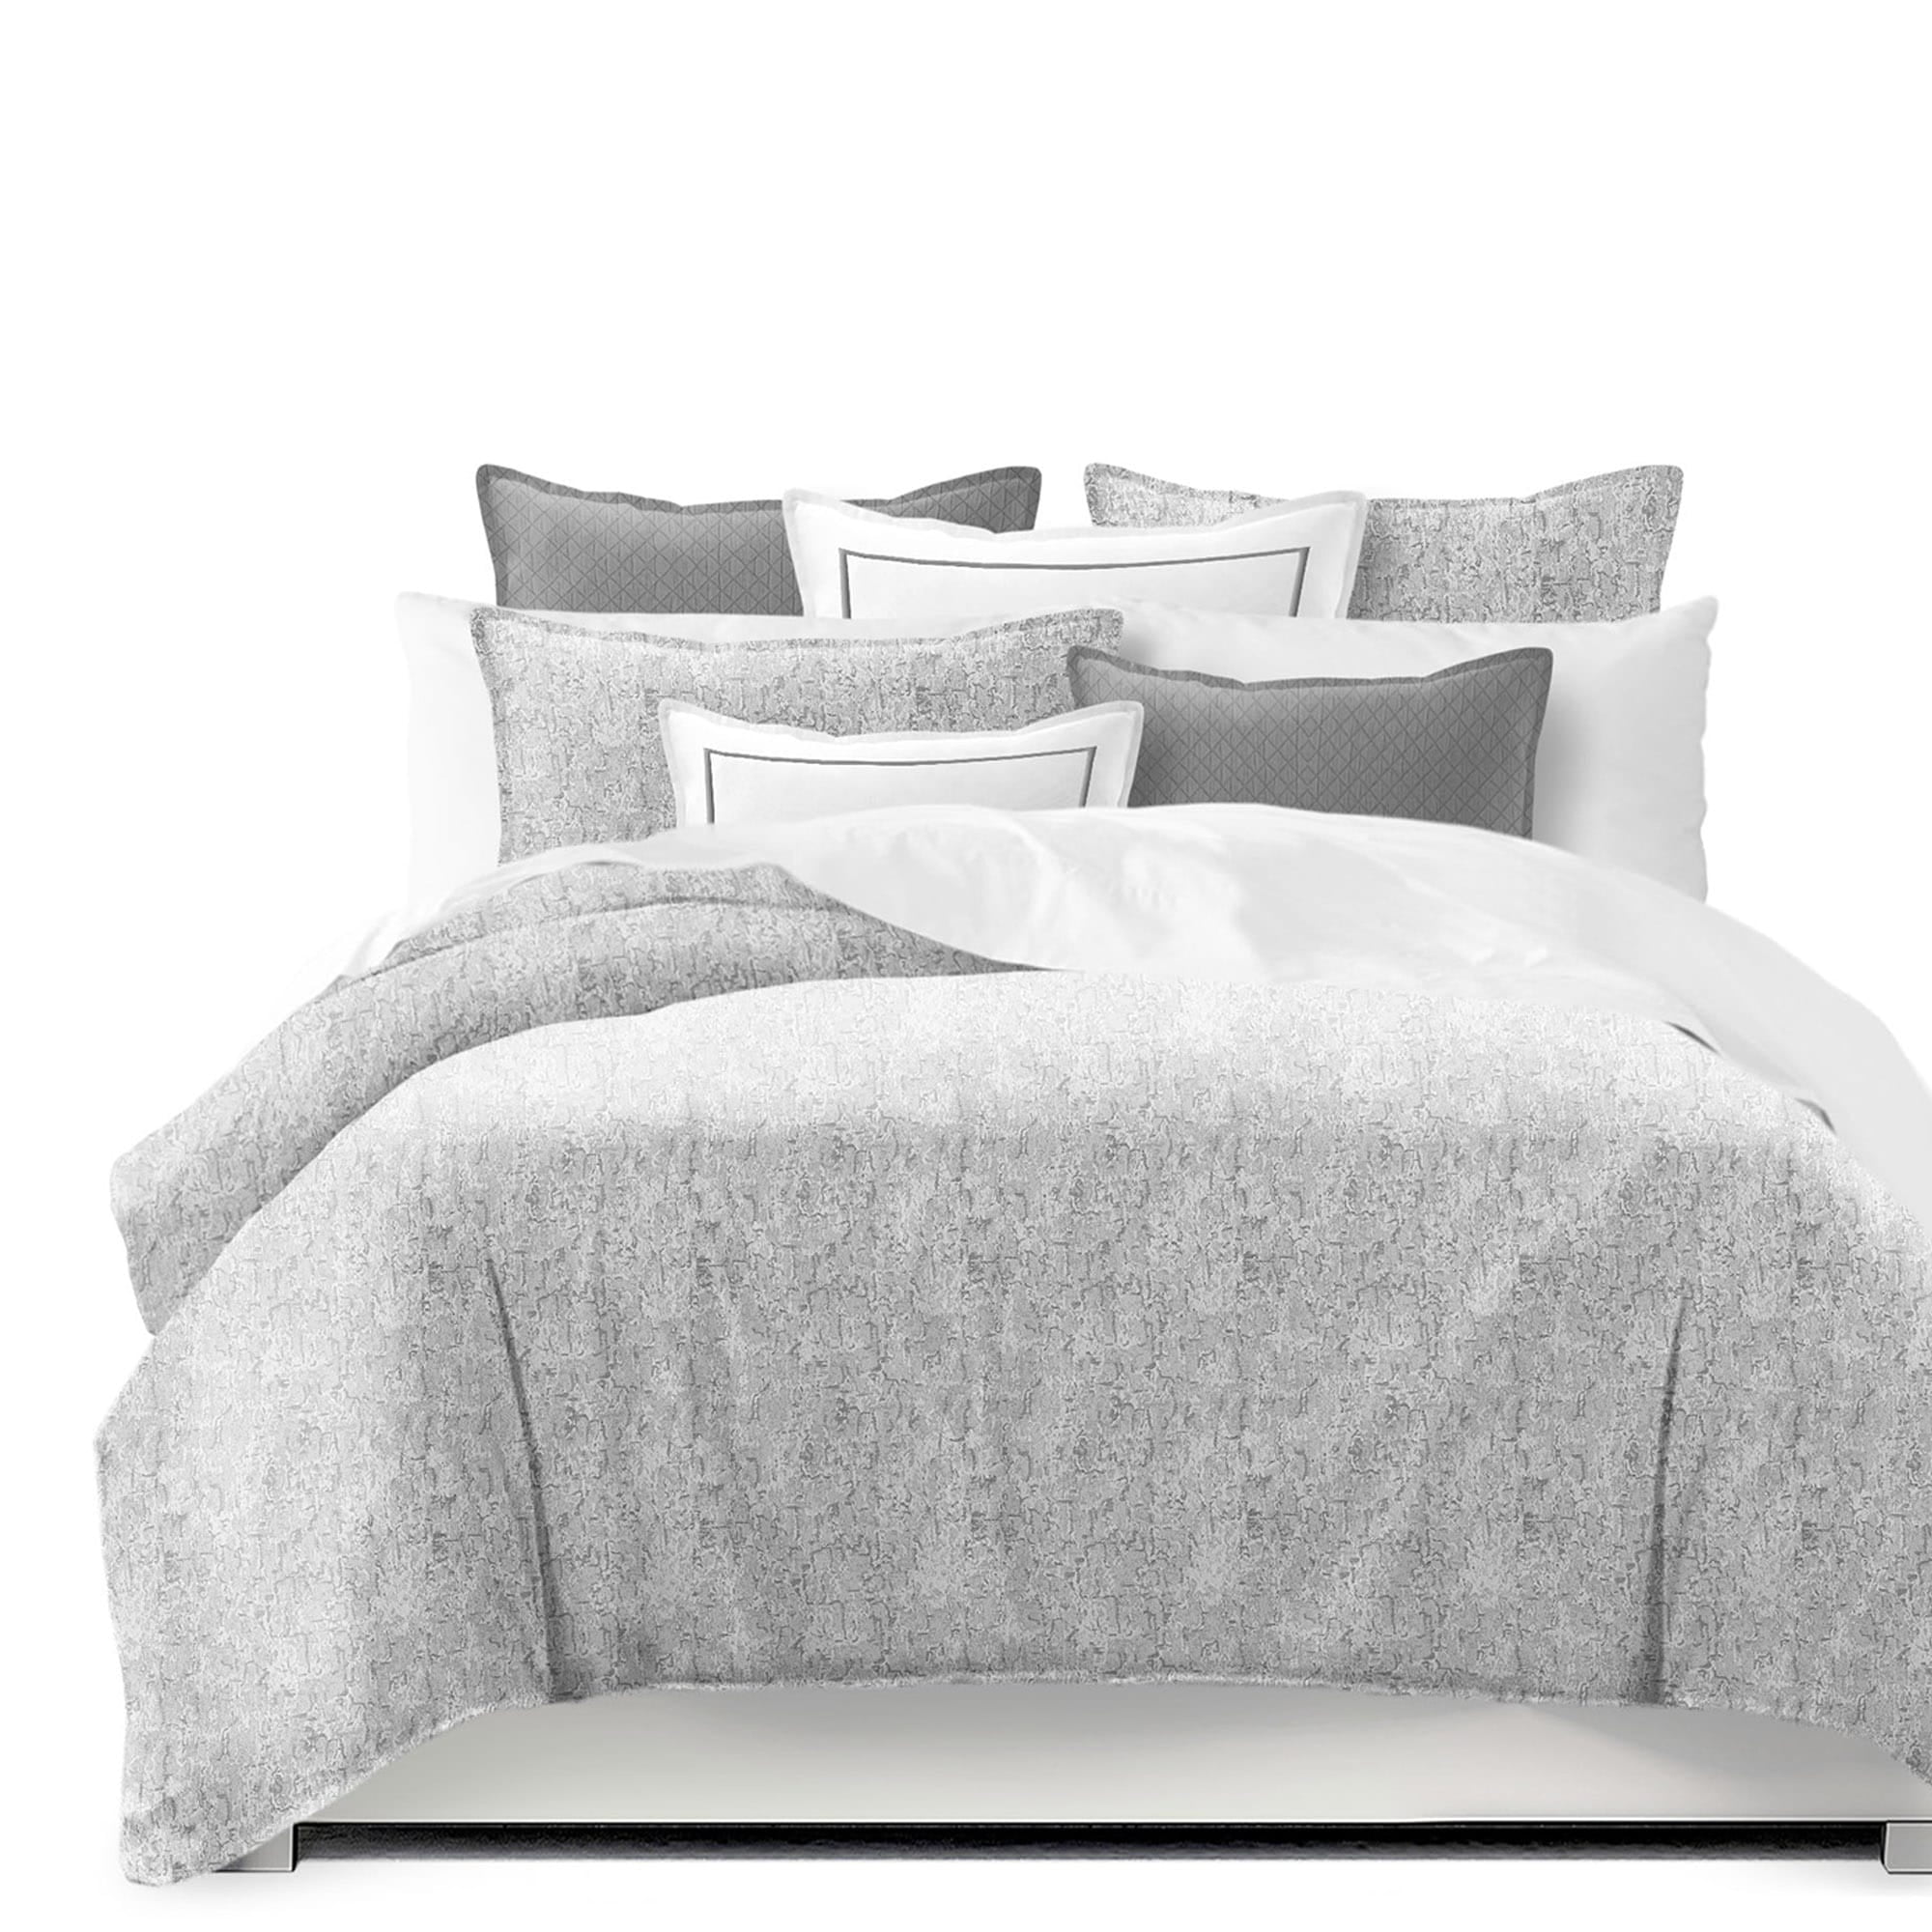 Picture of 6ix Tailors PER-SIL-CVT-SQ-5PC Square Perry Silver Super Queen Size Coverlet & 2 Pillow Shams Set - 5 Piece